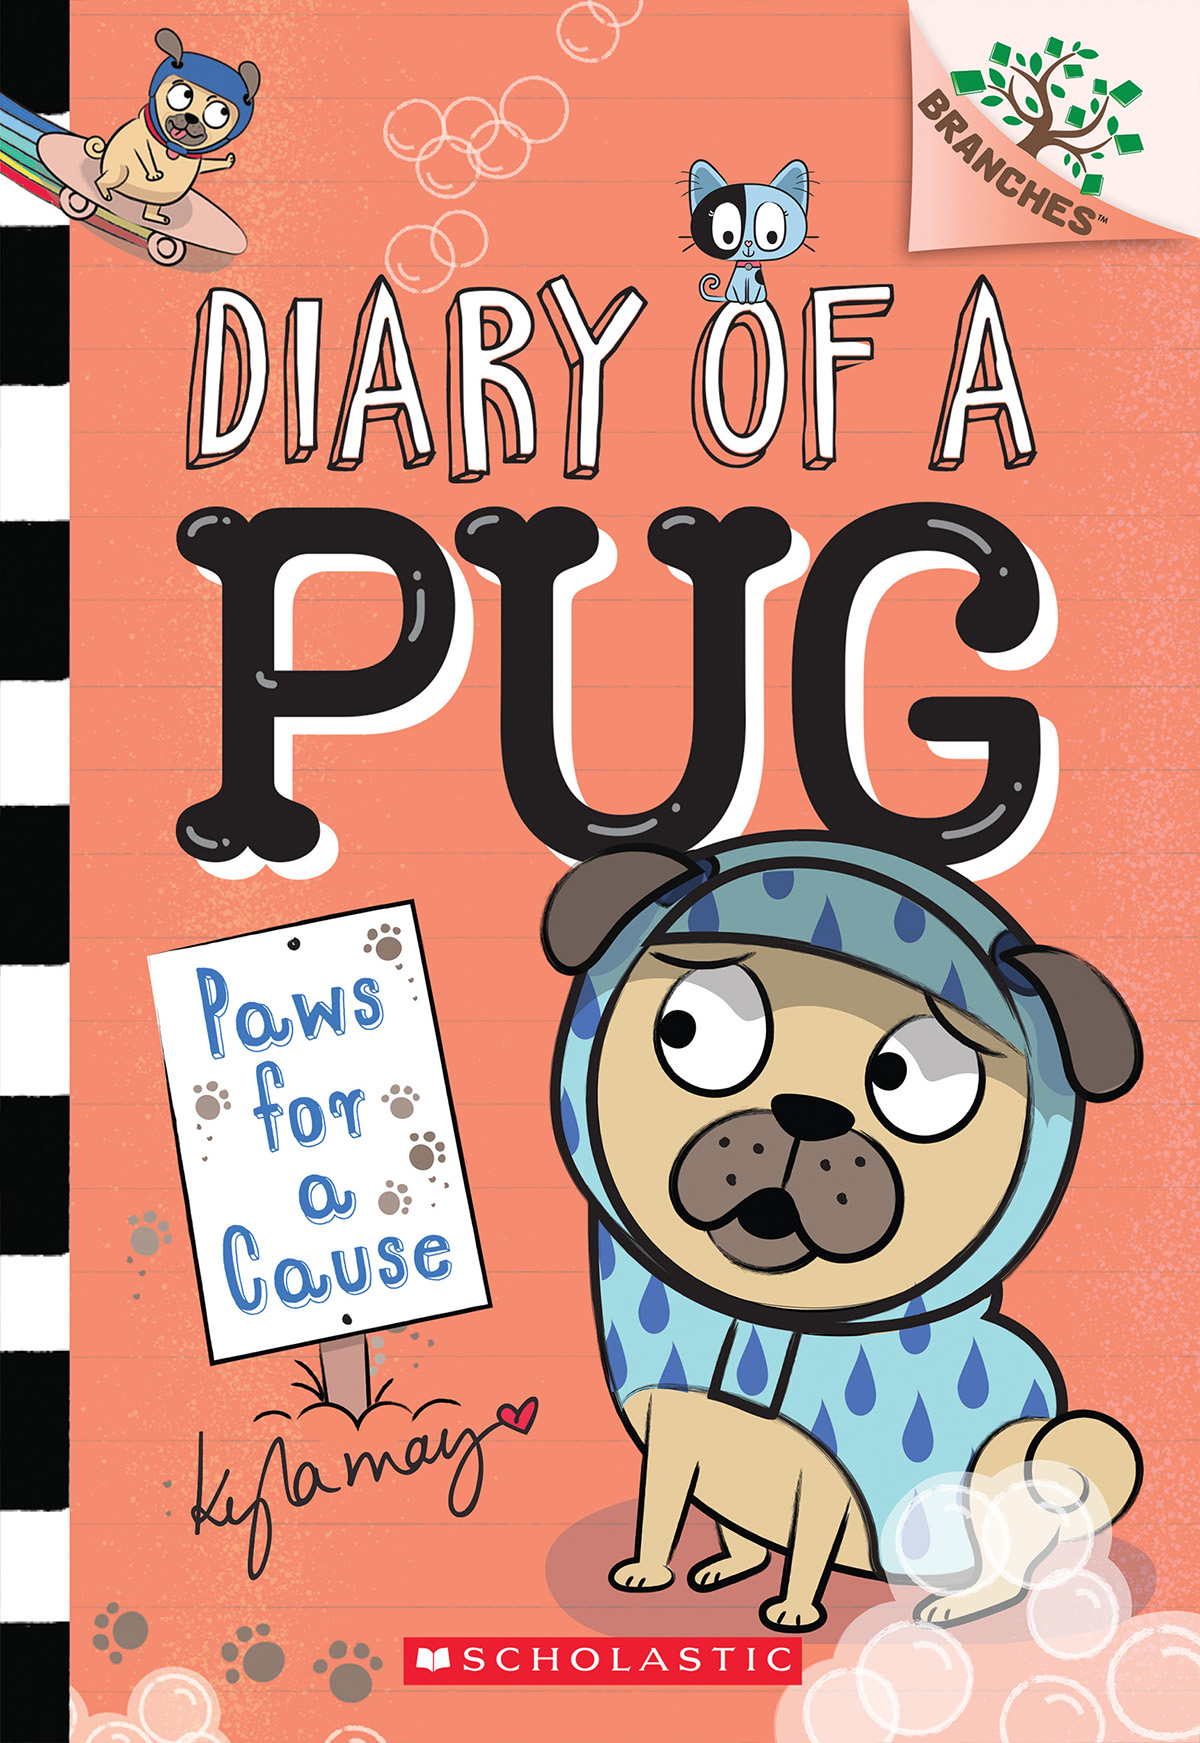 Diary of a Pug Vol.3 - Paws for a Cause | May, Kyla